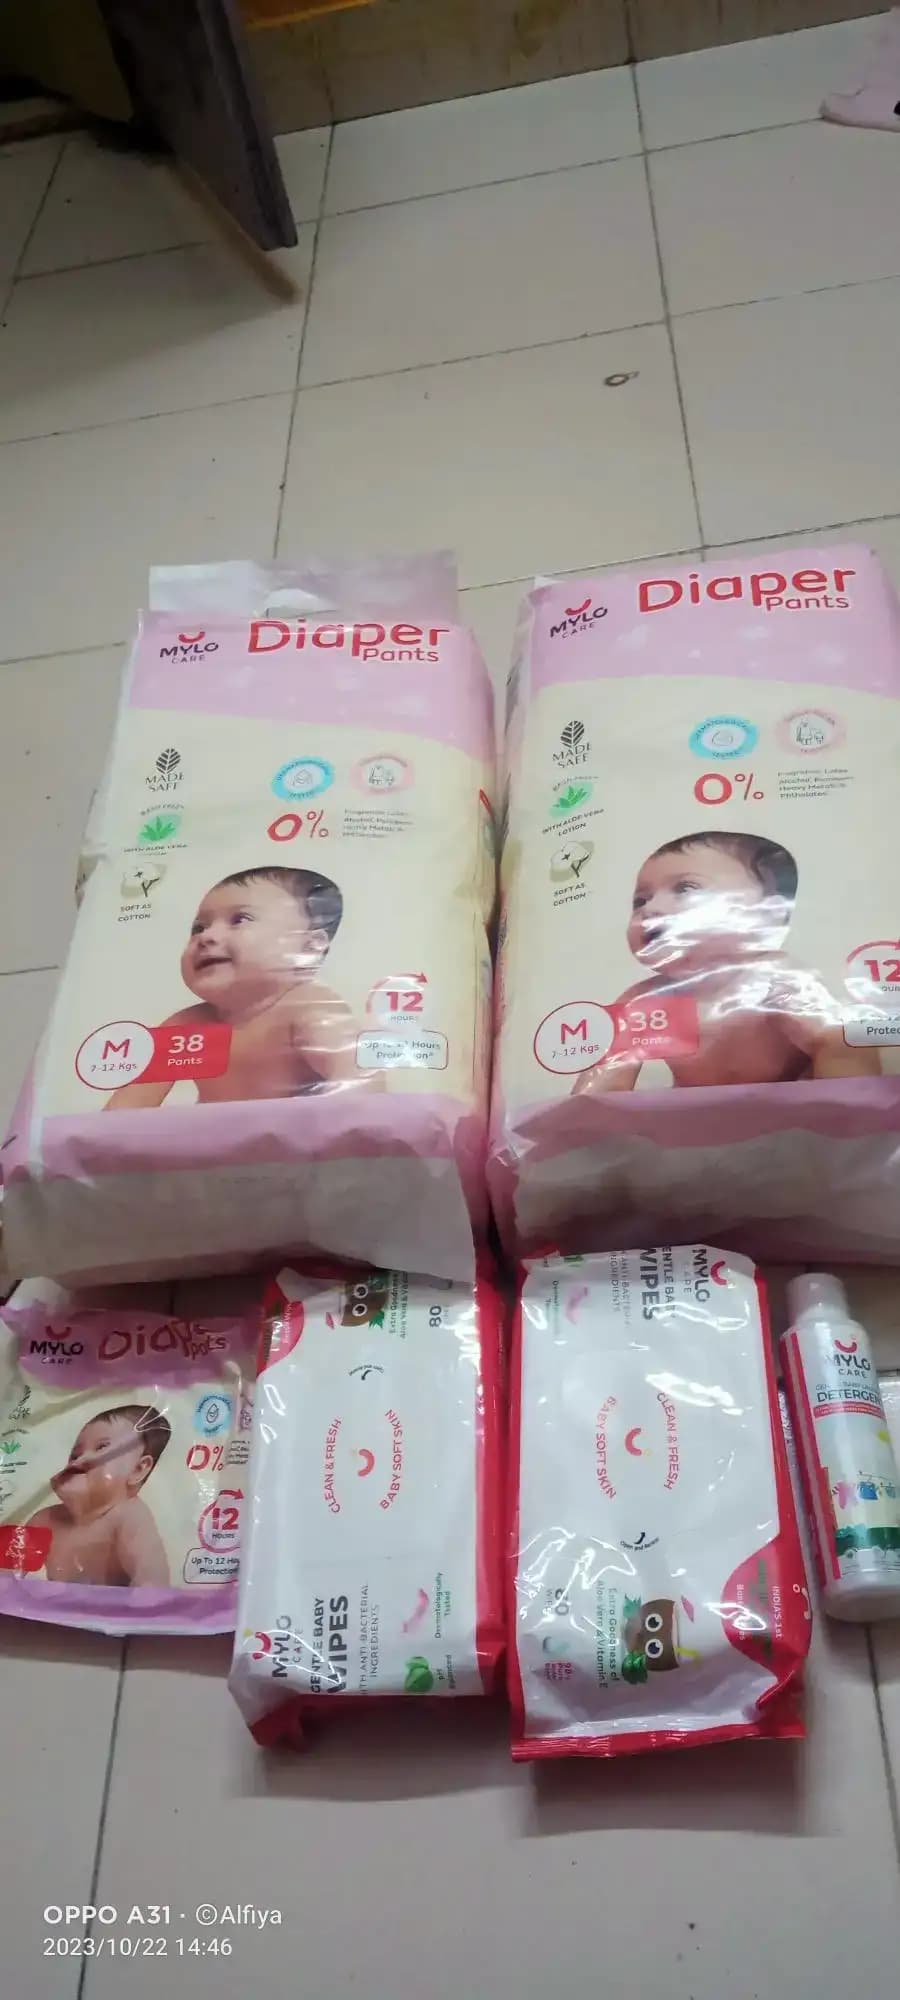 Monthly Diapering Super Saver Combo - Baby Diaper Pants Medium (M) - (76 count) + Baby Wipes (Pack of 2)